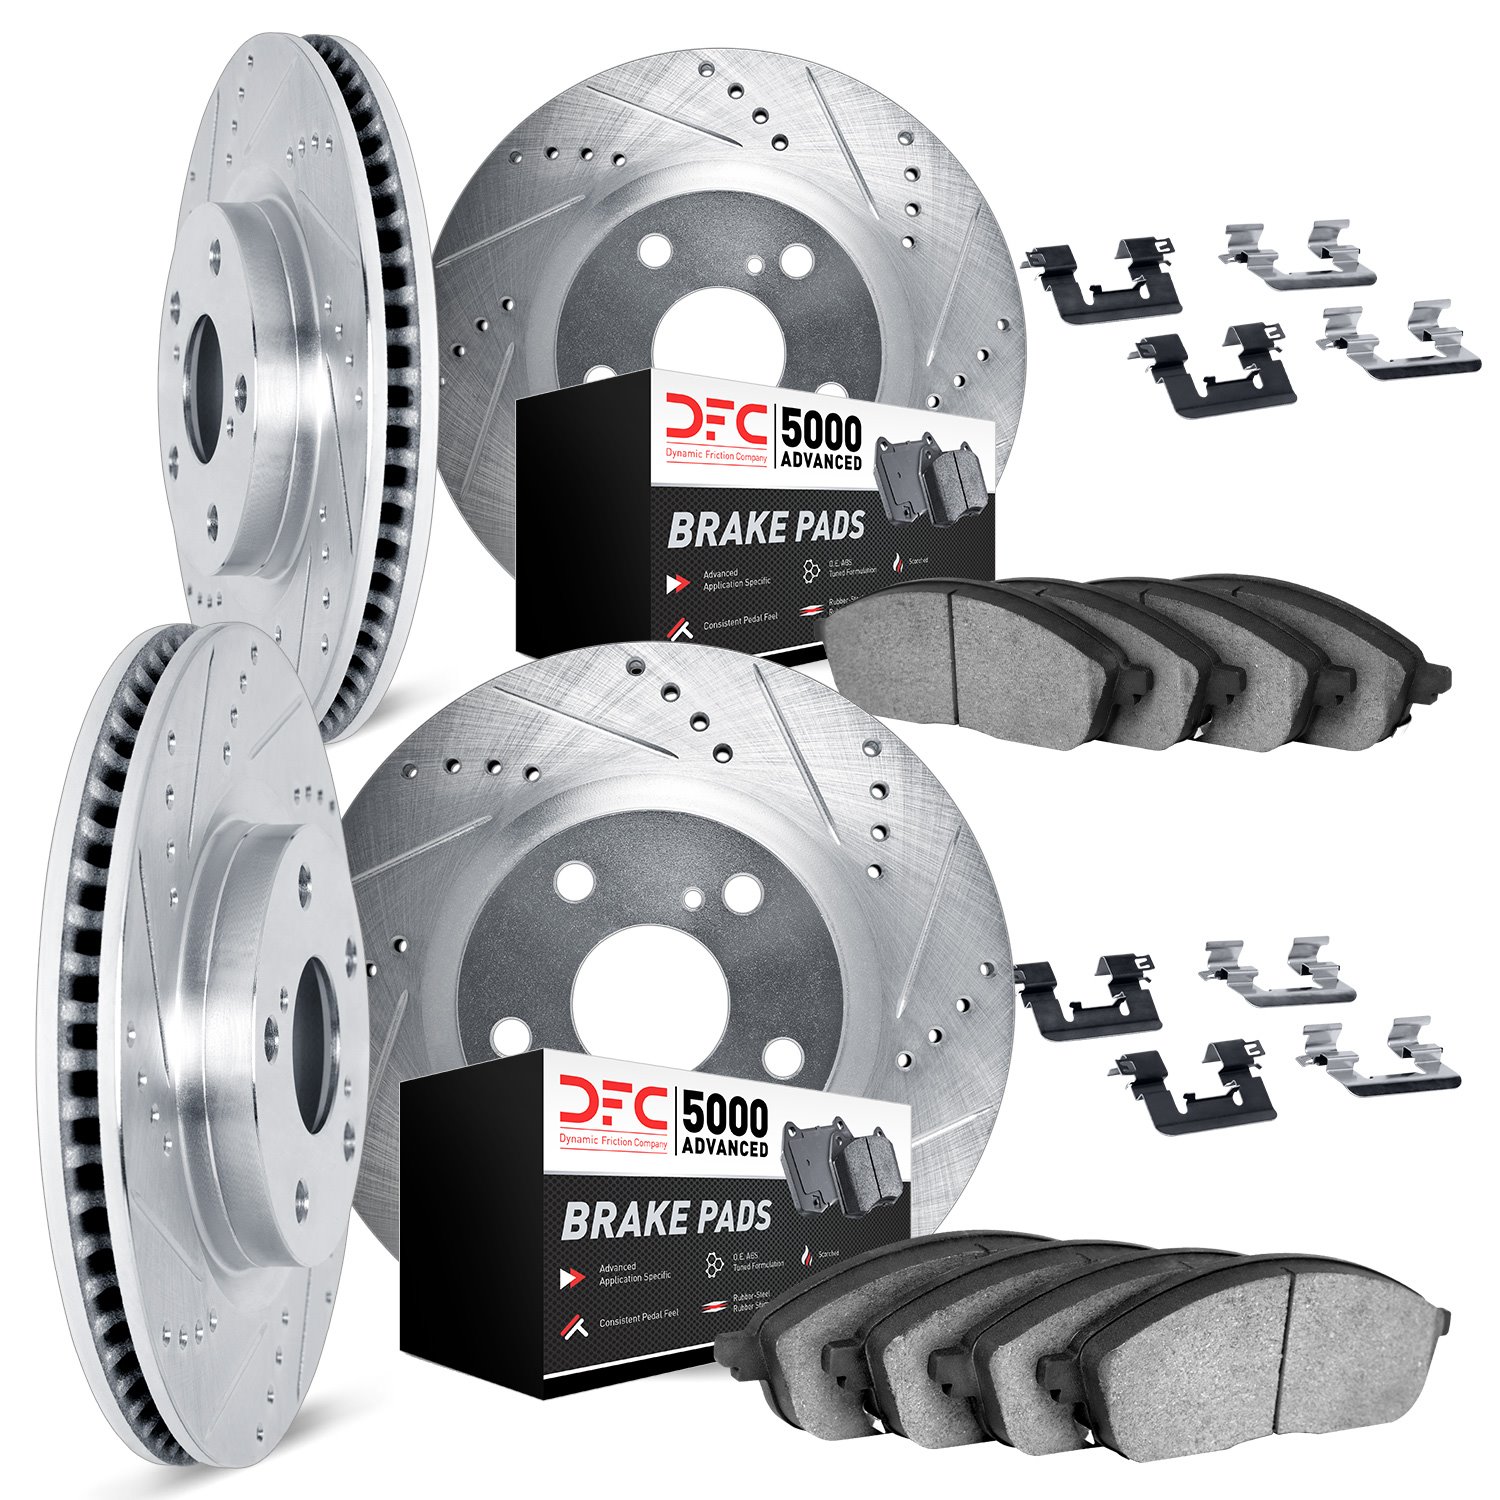 7514-47284 Drilled/Slotted Brake Rotors w/5000 Advanced Brake Pads Kit & Hardware [Silver], 1963-1982 GM, Position: Front and Re